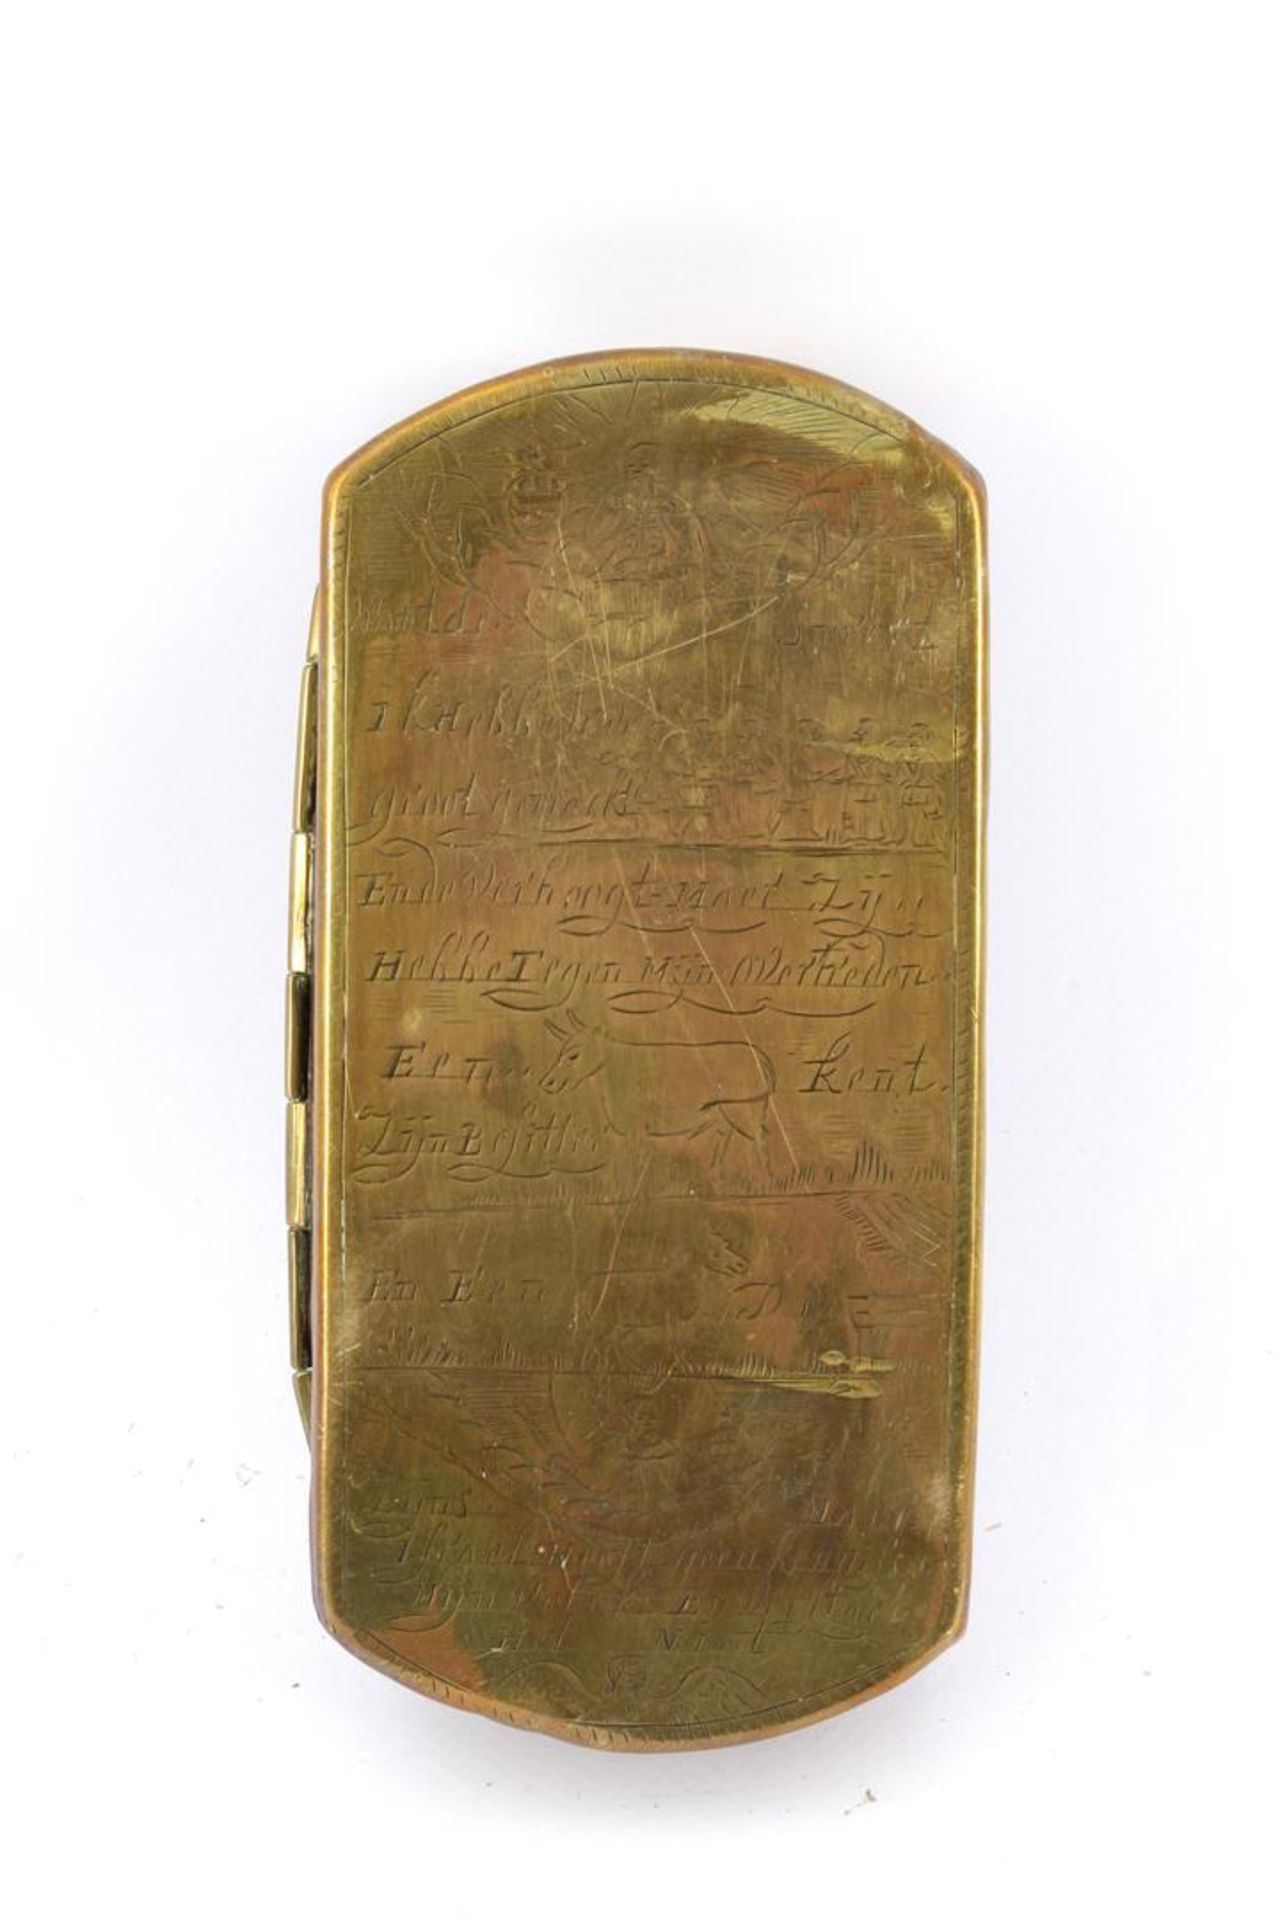 Copper 18th century tobacco box with etched decor and text Matthew 23 verse 37, 3 cm high, 15.7x8 - Image 4 of 4